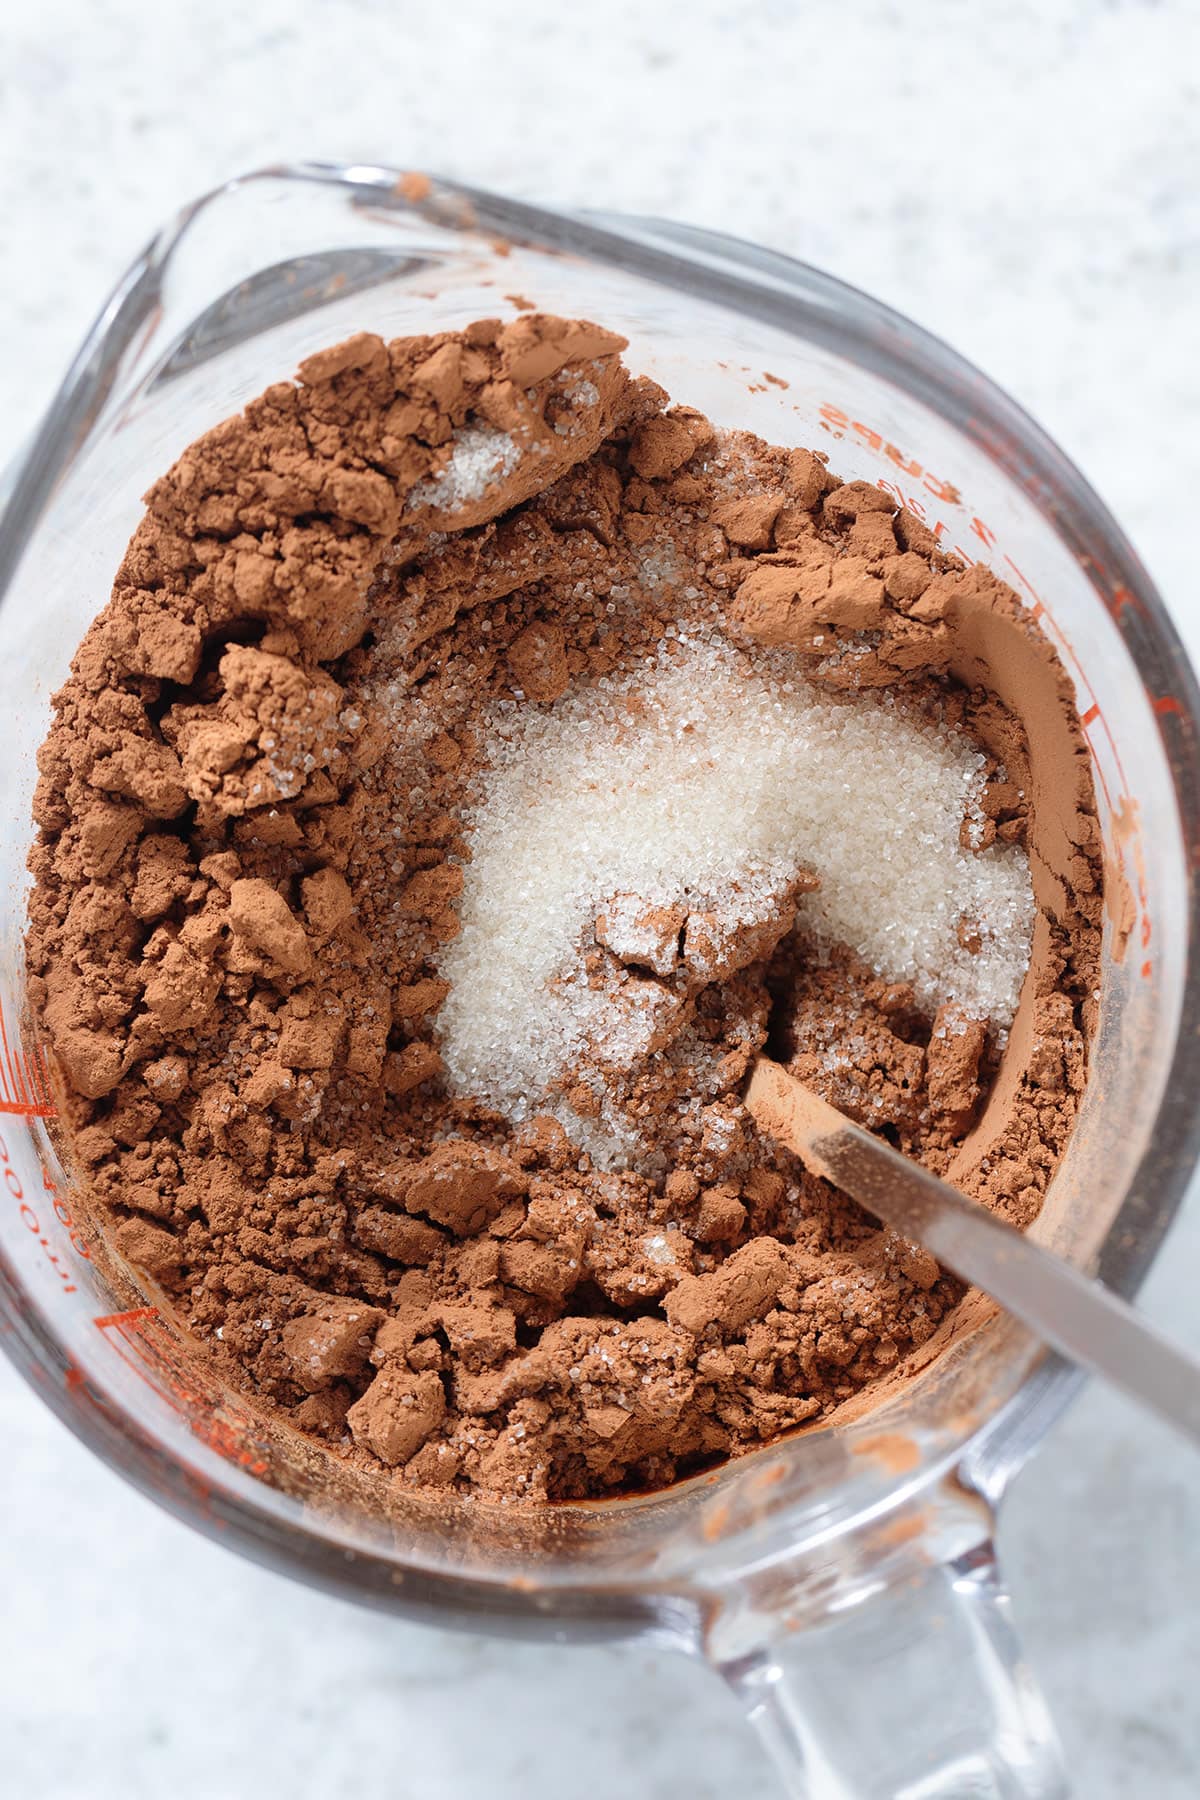 Cane sugar and cacao powder in a large glass measuring cup being mixed together with a spoon.